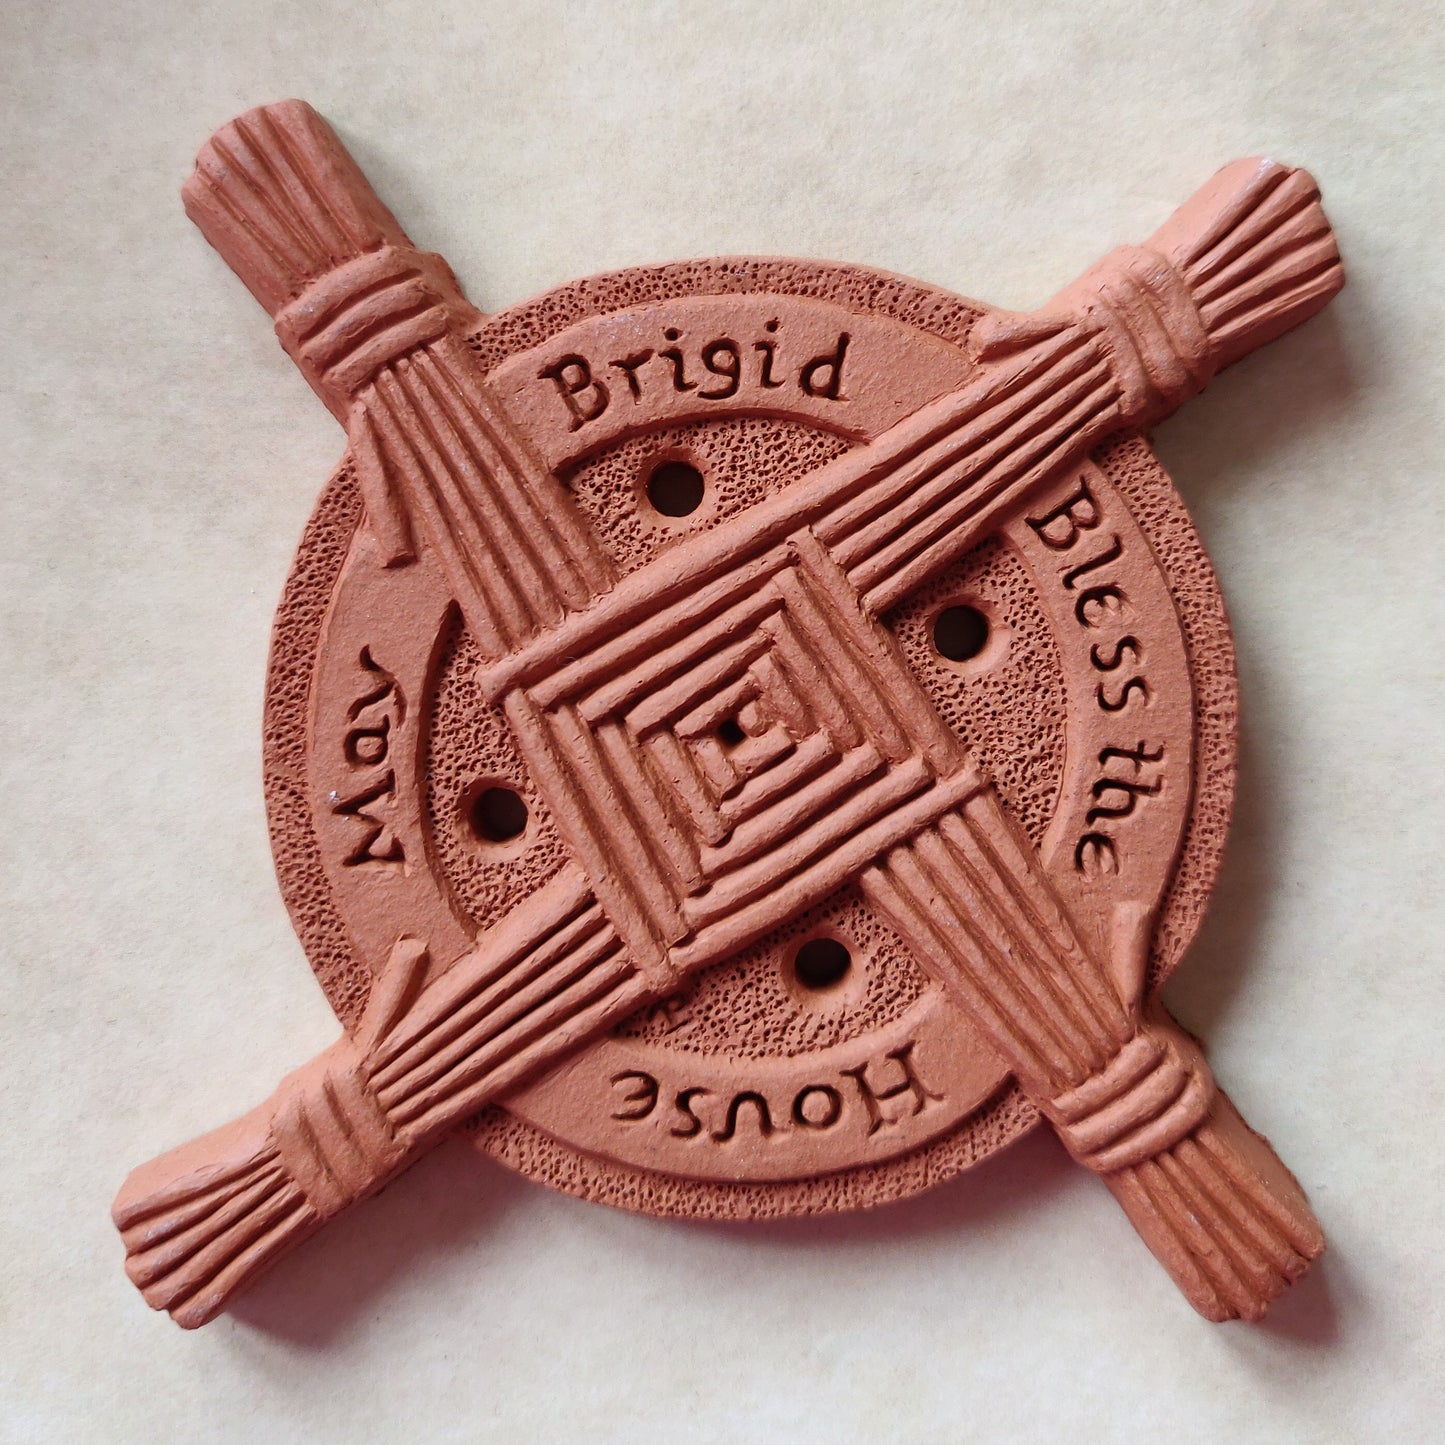 St Brigid's Blessing wall tile